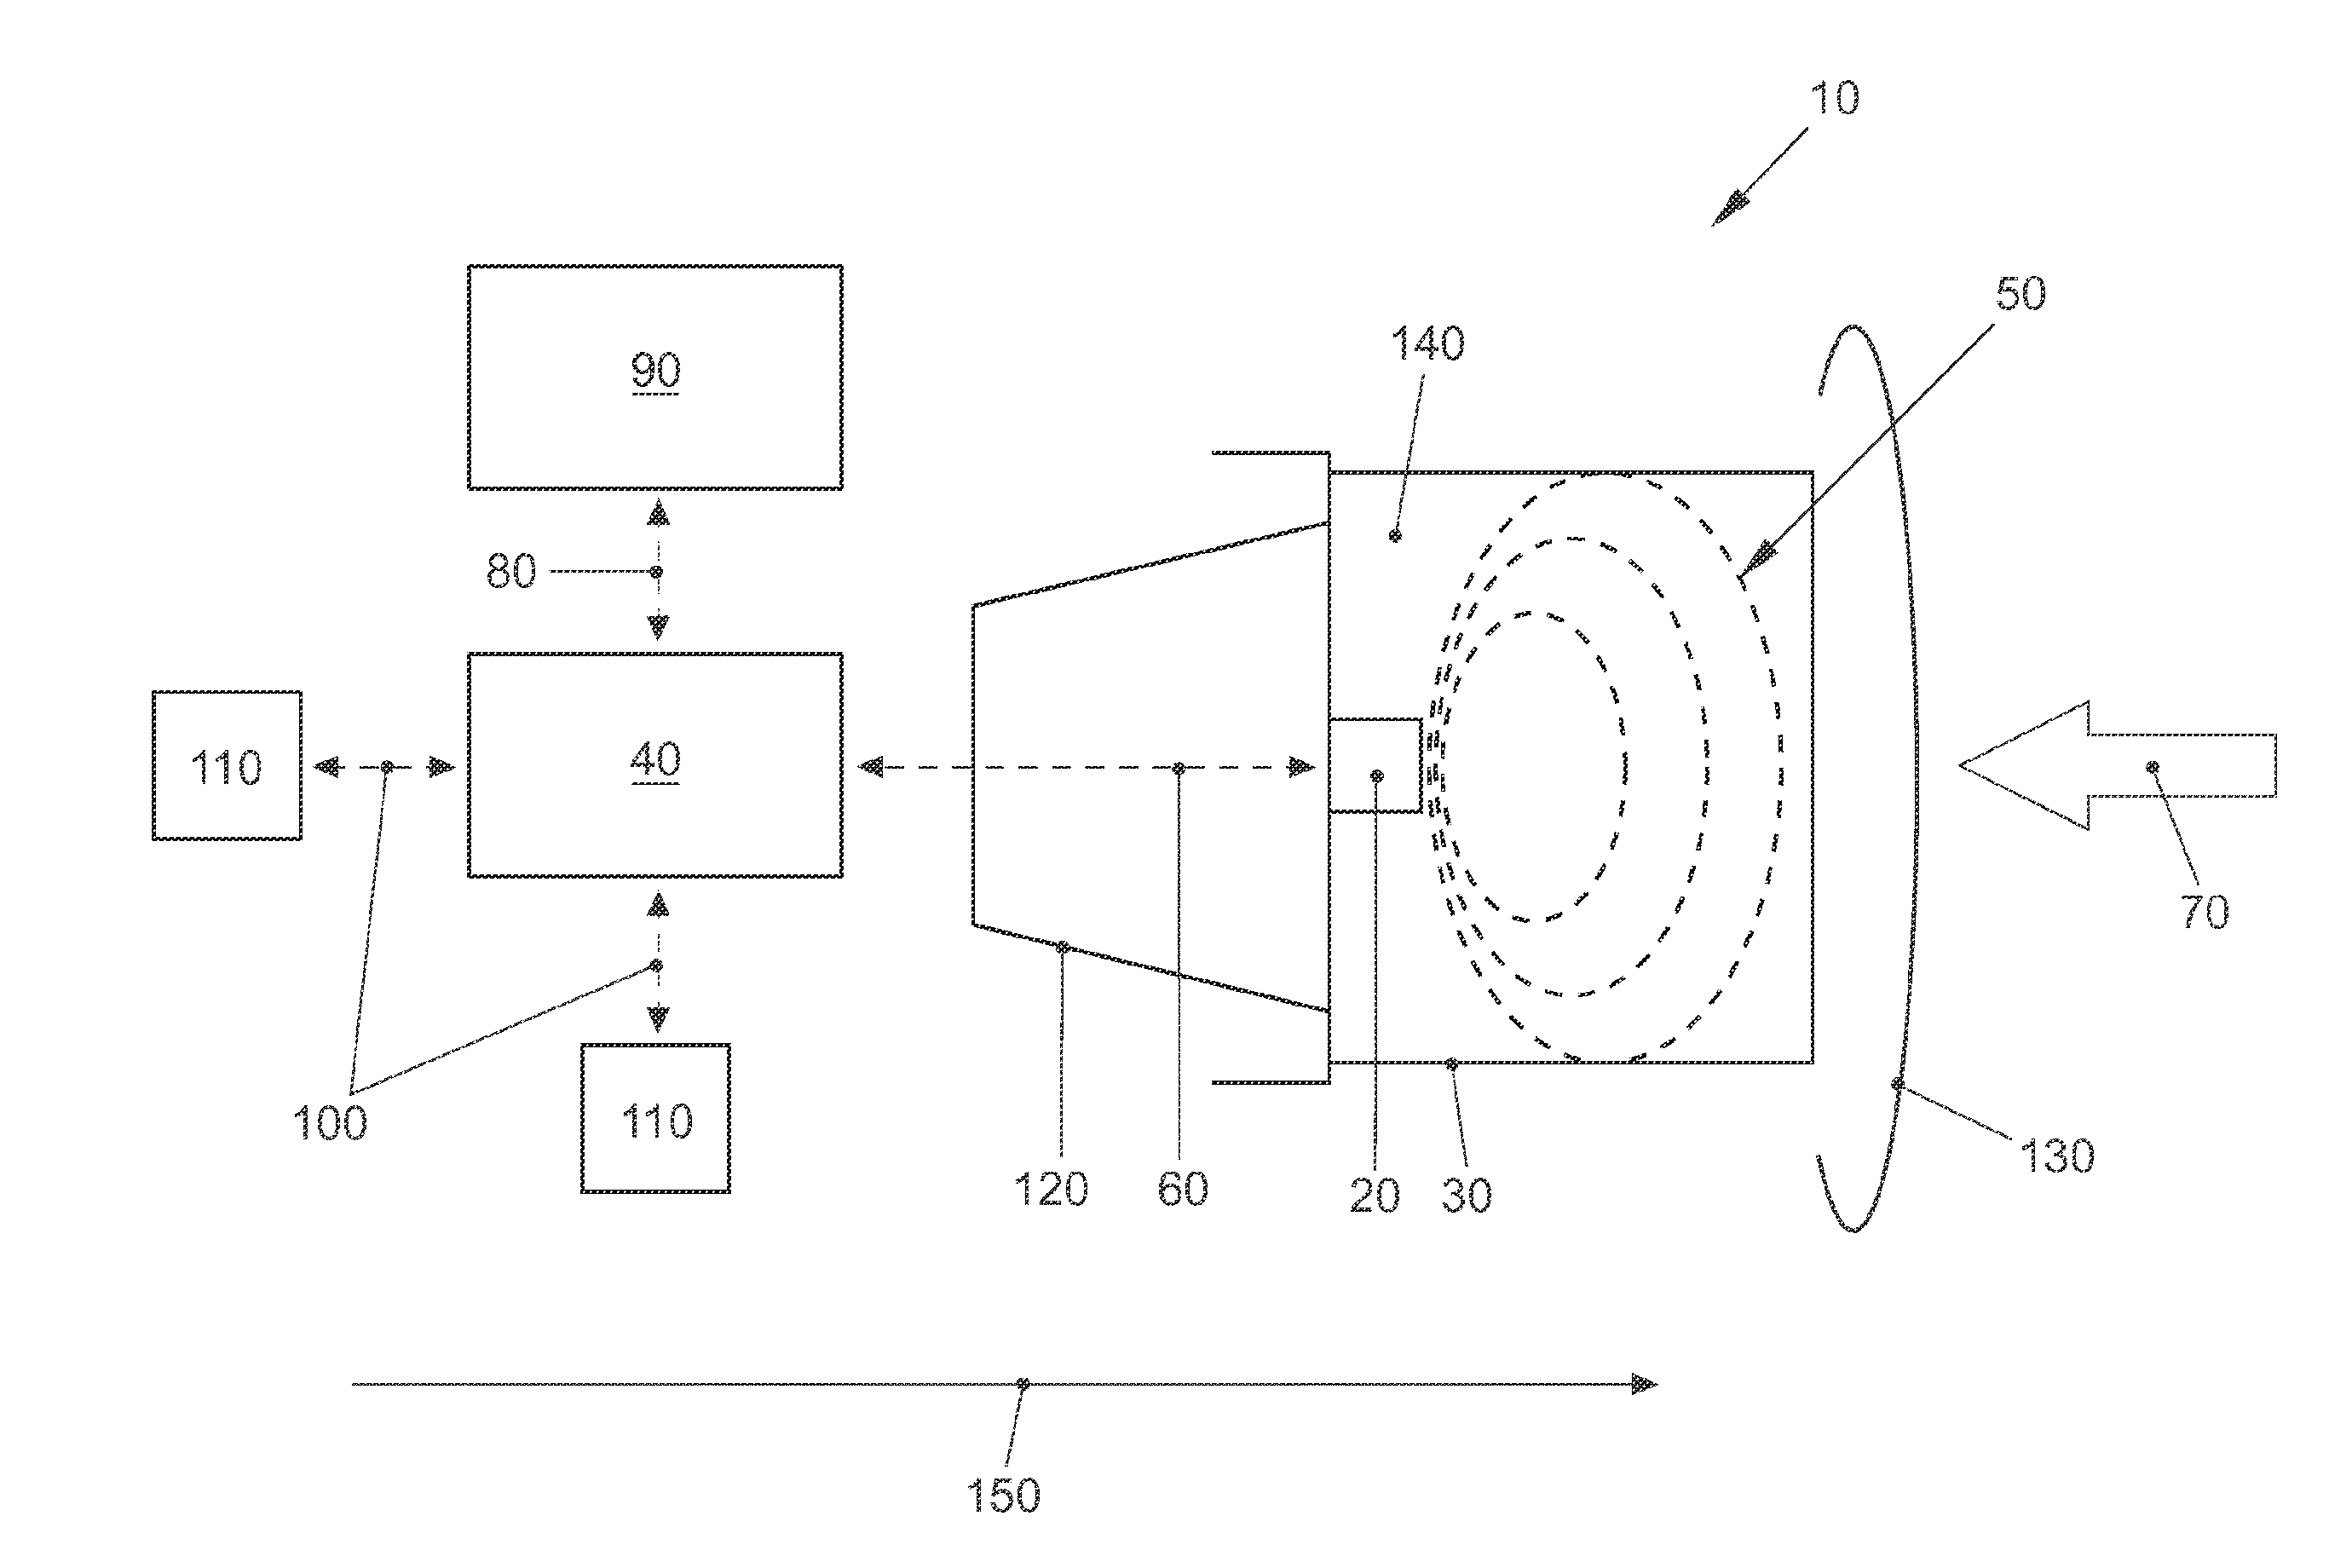 Pedestrian  protection  system  for  a  vehicle